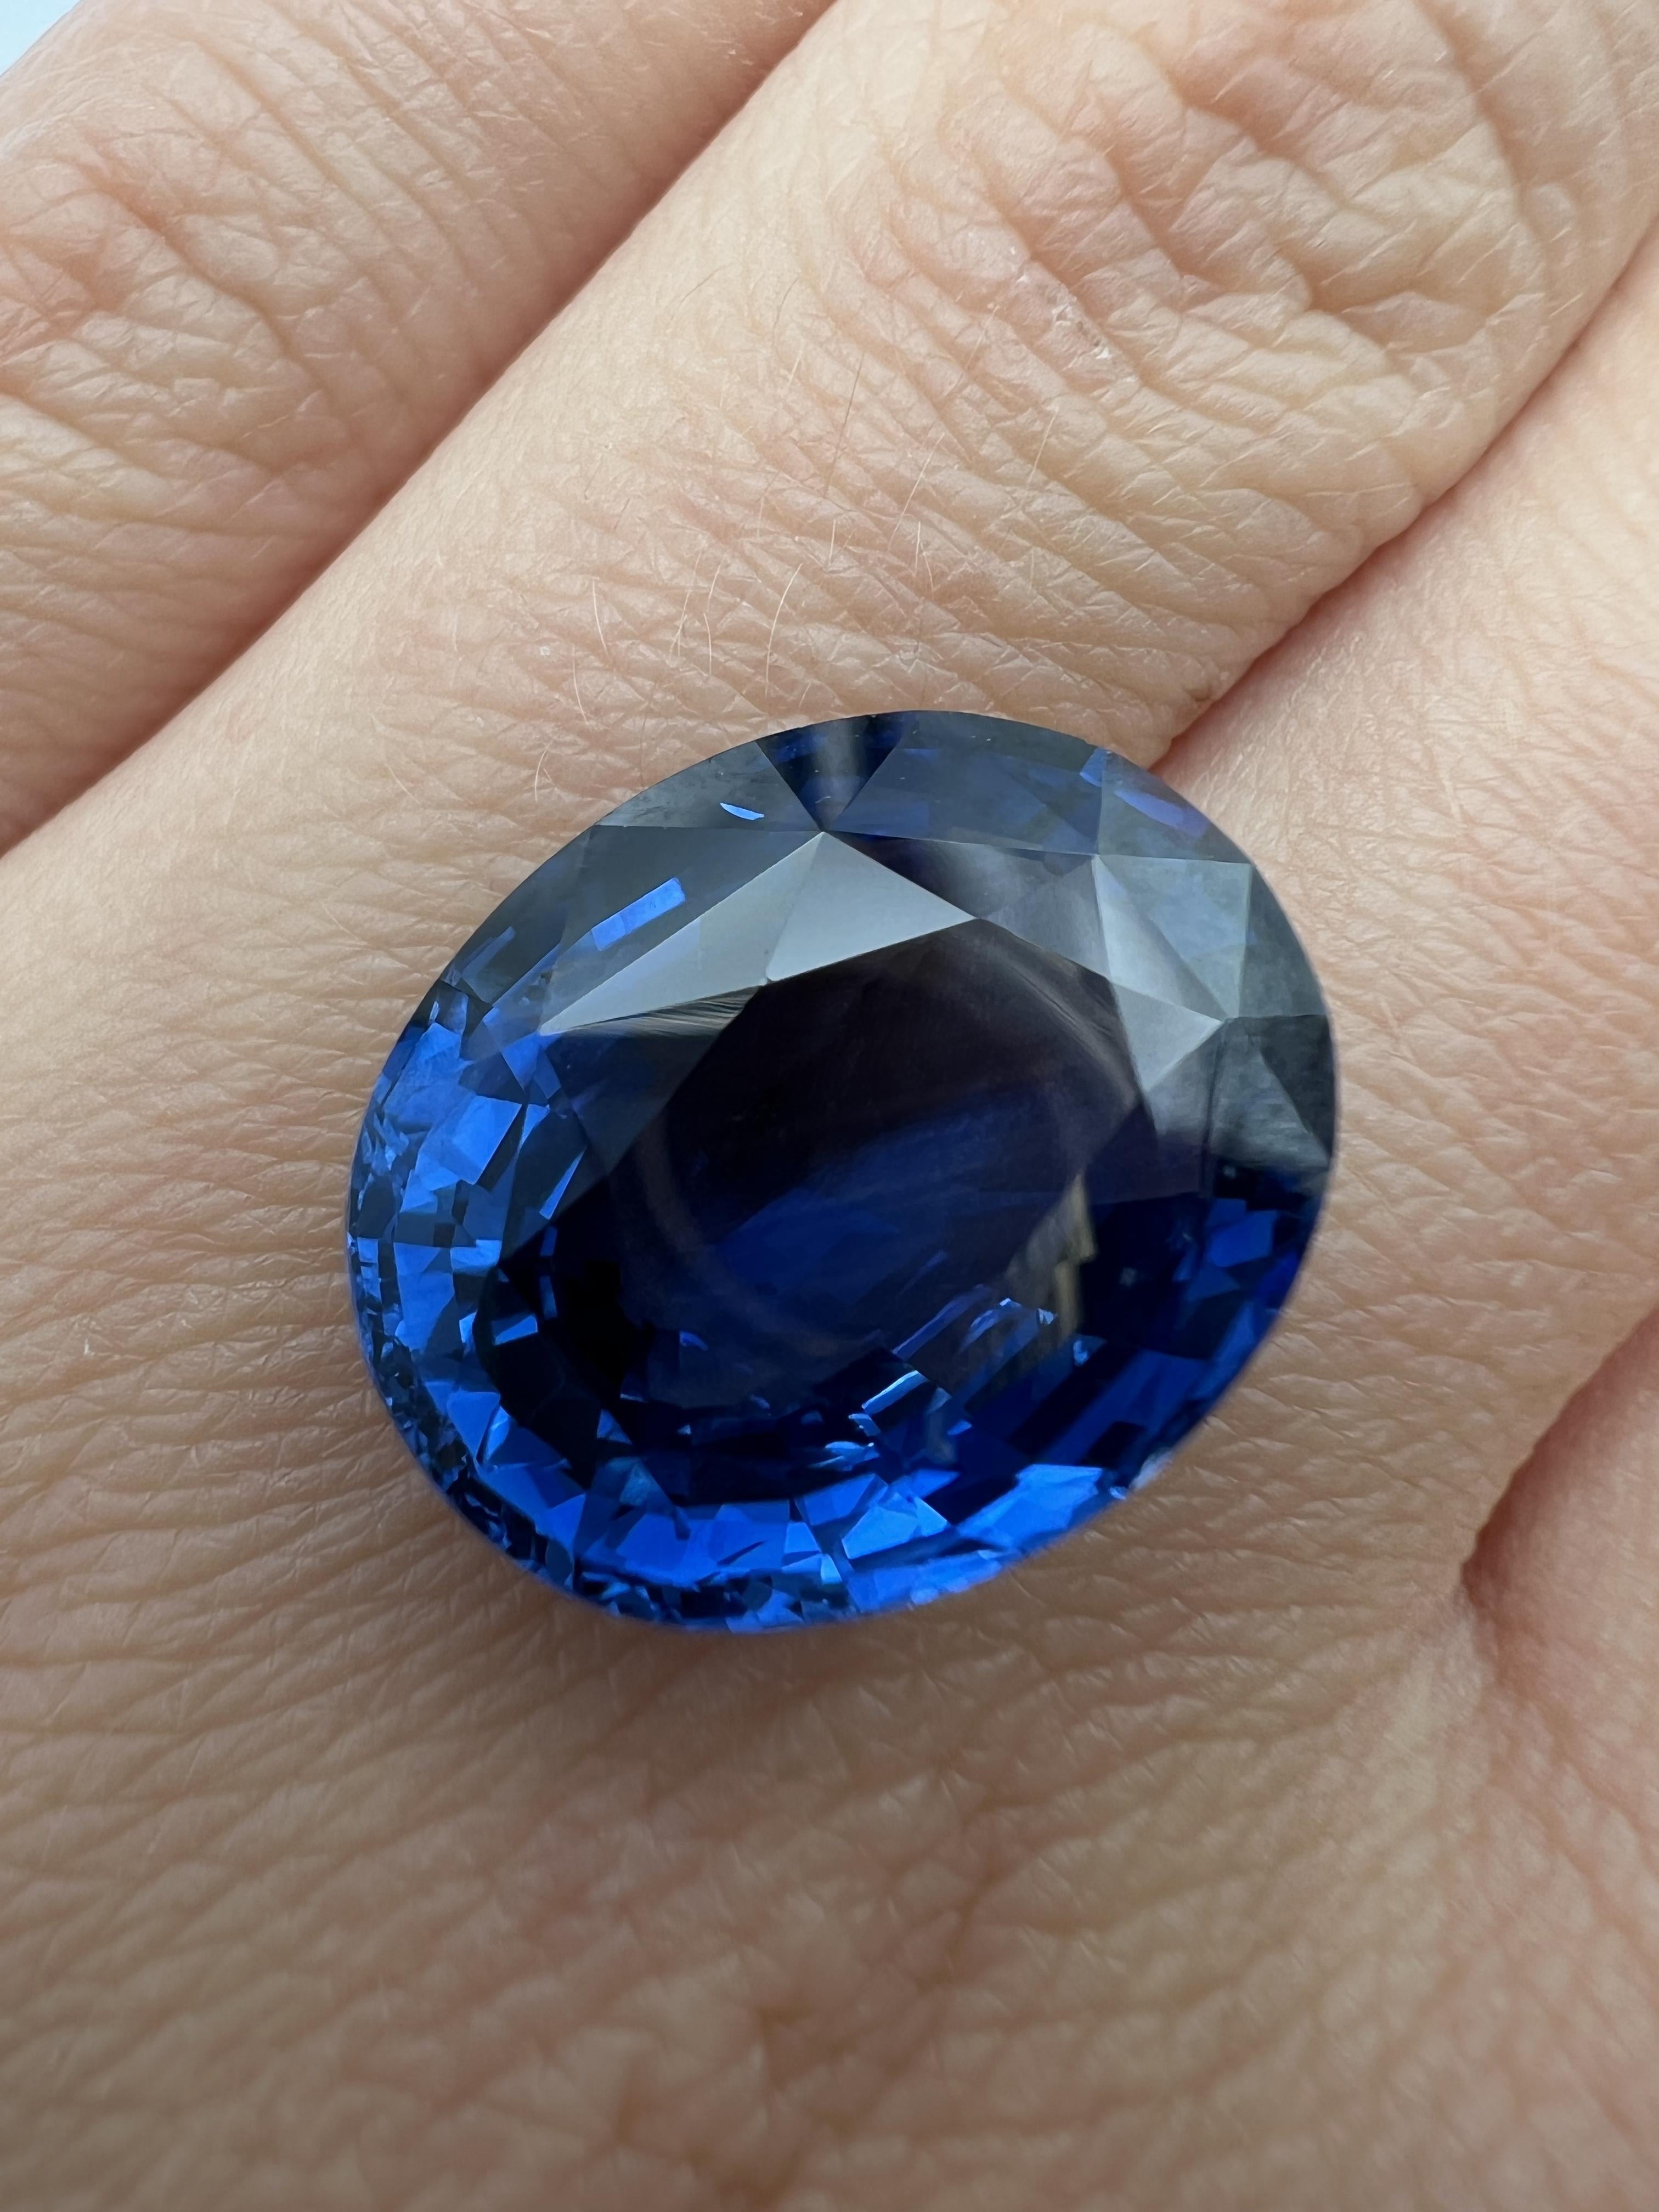 Brilliant Cut GIA Certified 16.95 Carat Exceptional Sri Lankan Heated Blue Sapphire For Sale